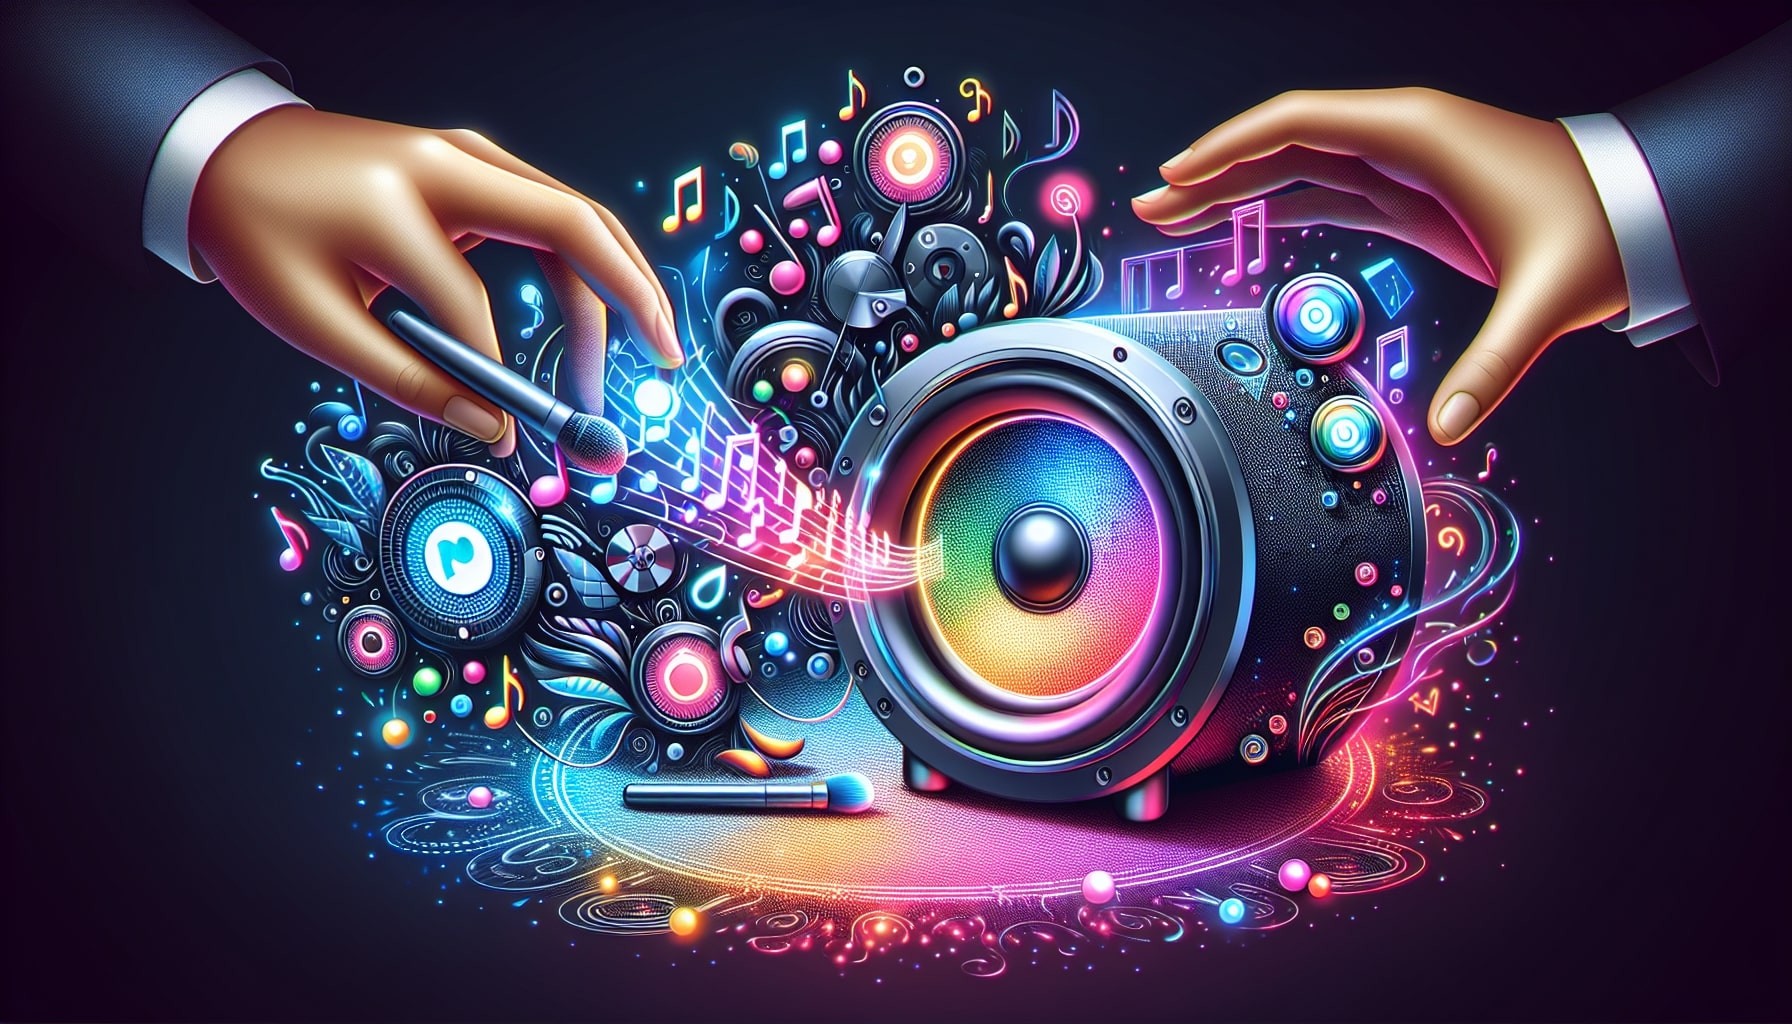 Colorful abstract music and technology illustration.